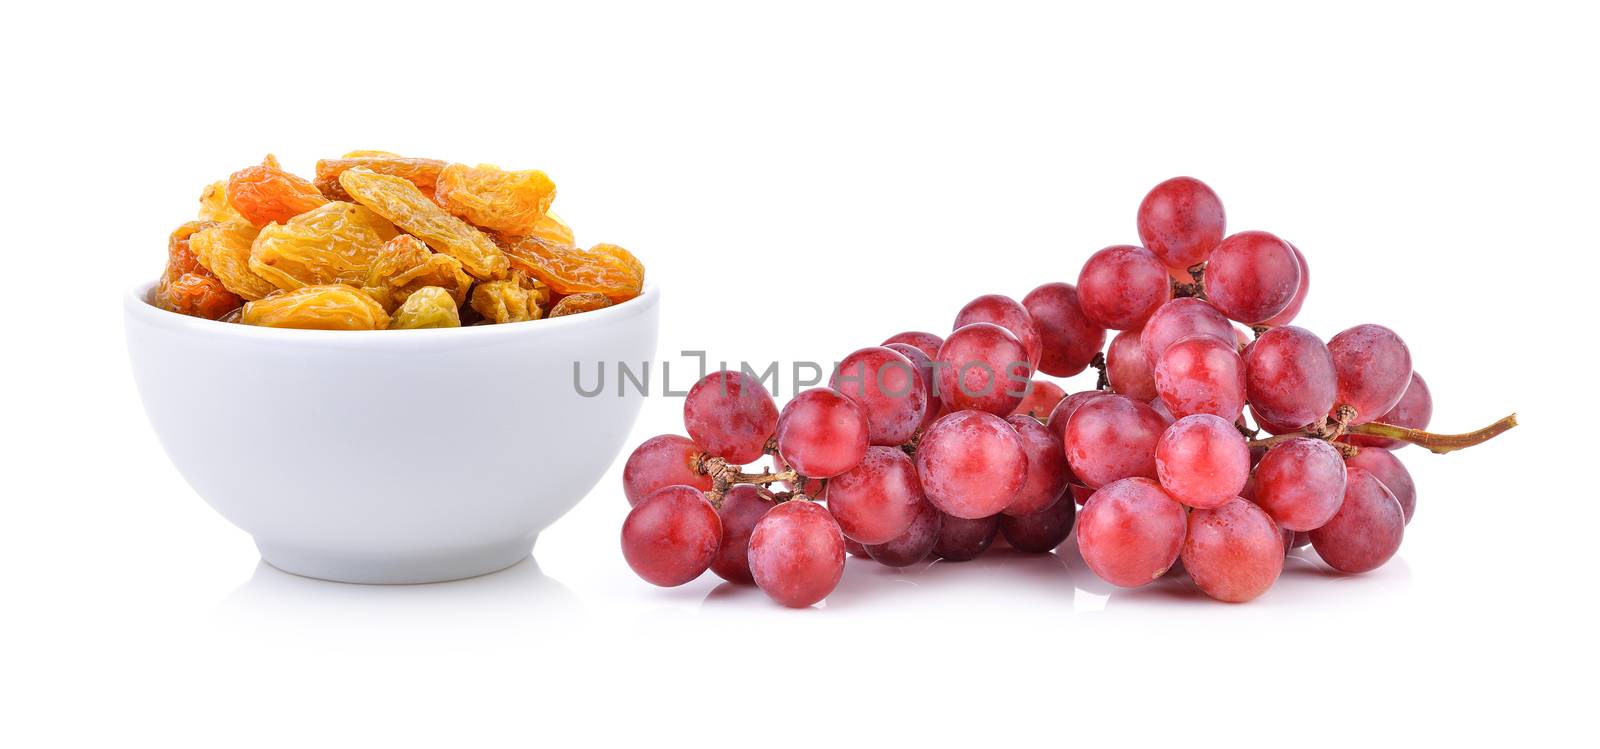 raisin in the white bowl and grape on white background